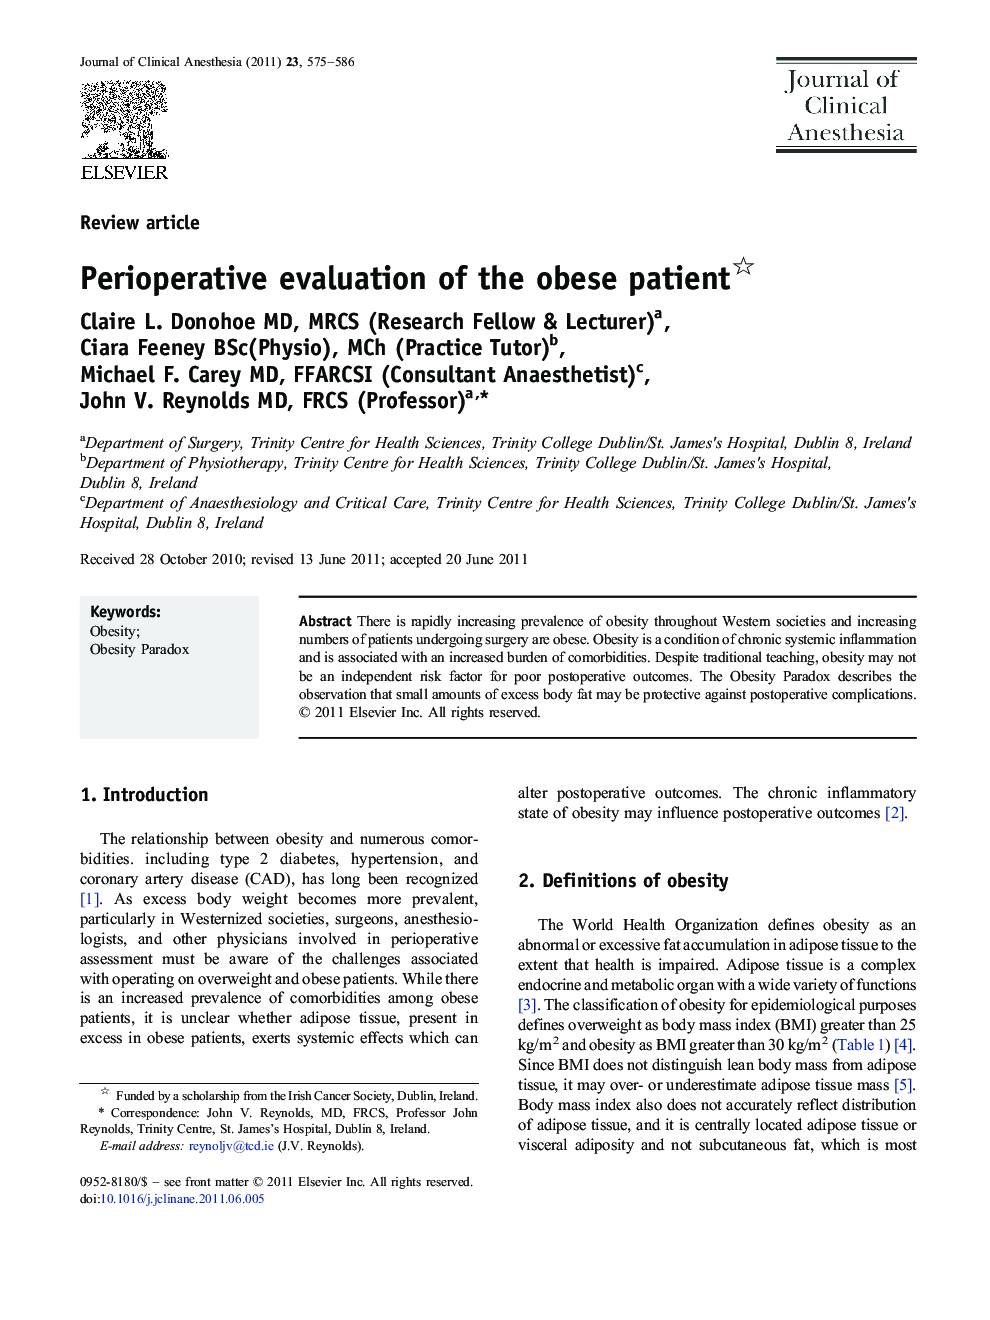 Perioperative evaluation of the obese patient 